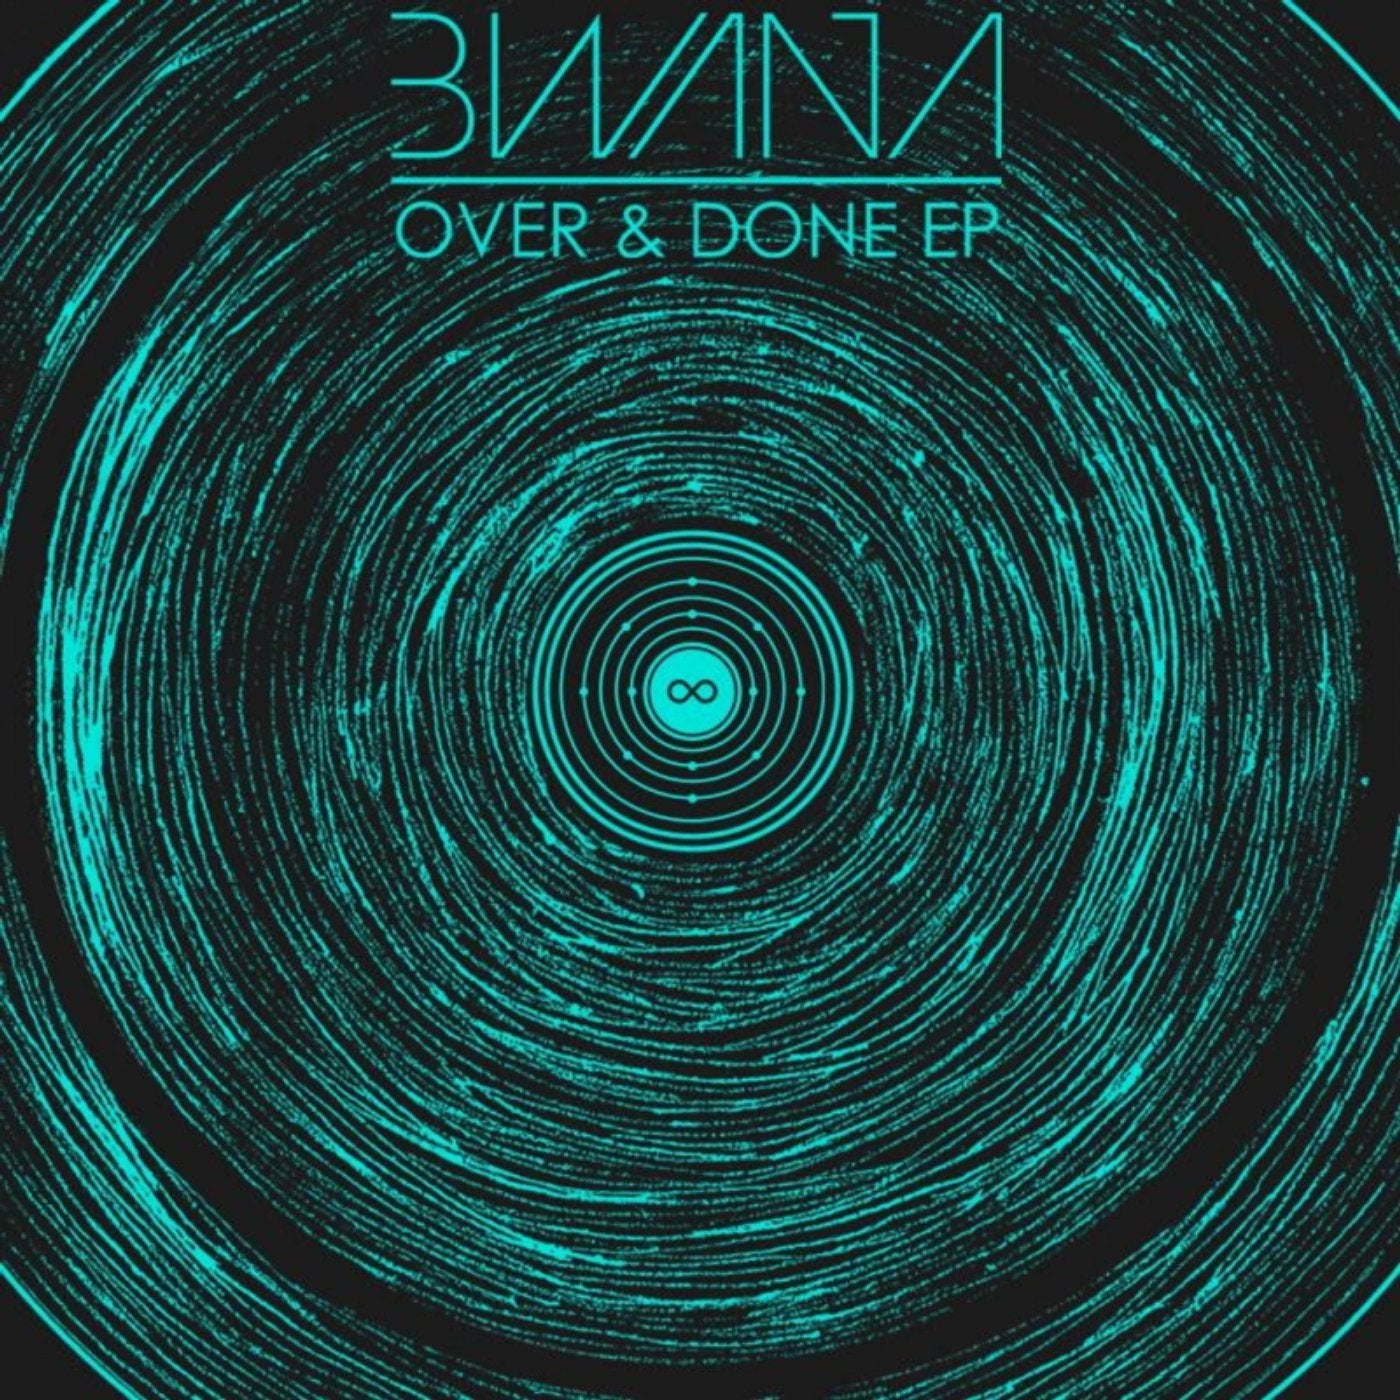 Over & Done EP